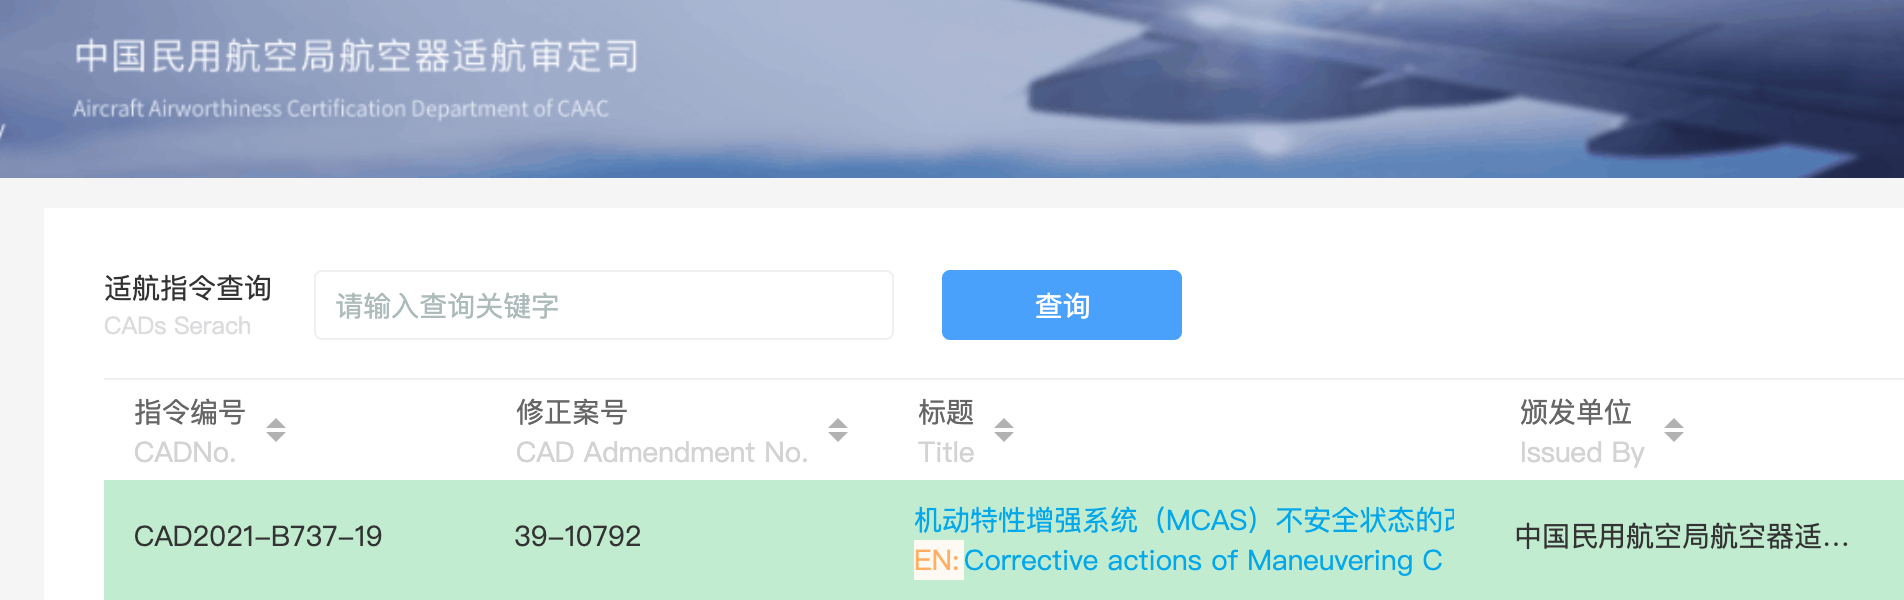 Official website of Aircraft Airworthiness Certification Department of Civil Aviation Administration of China